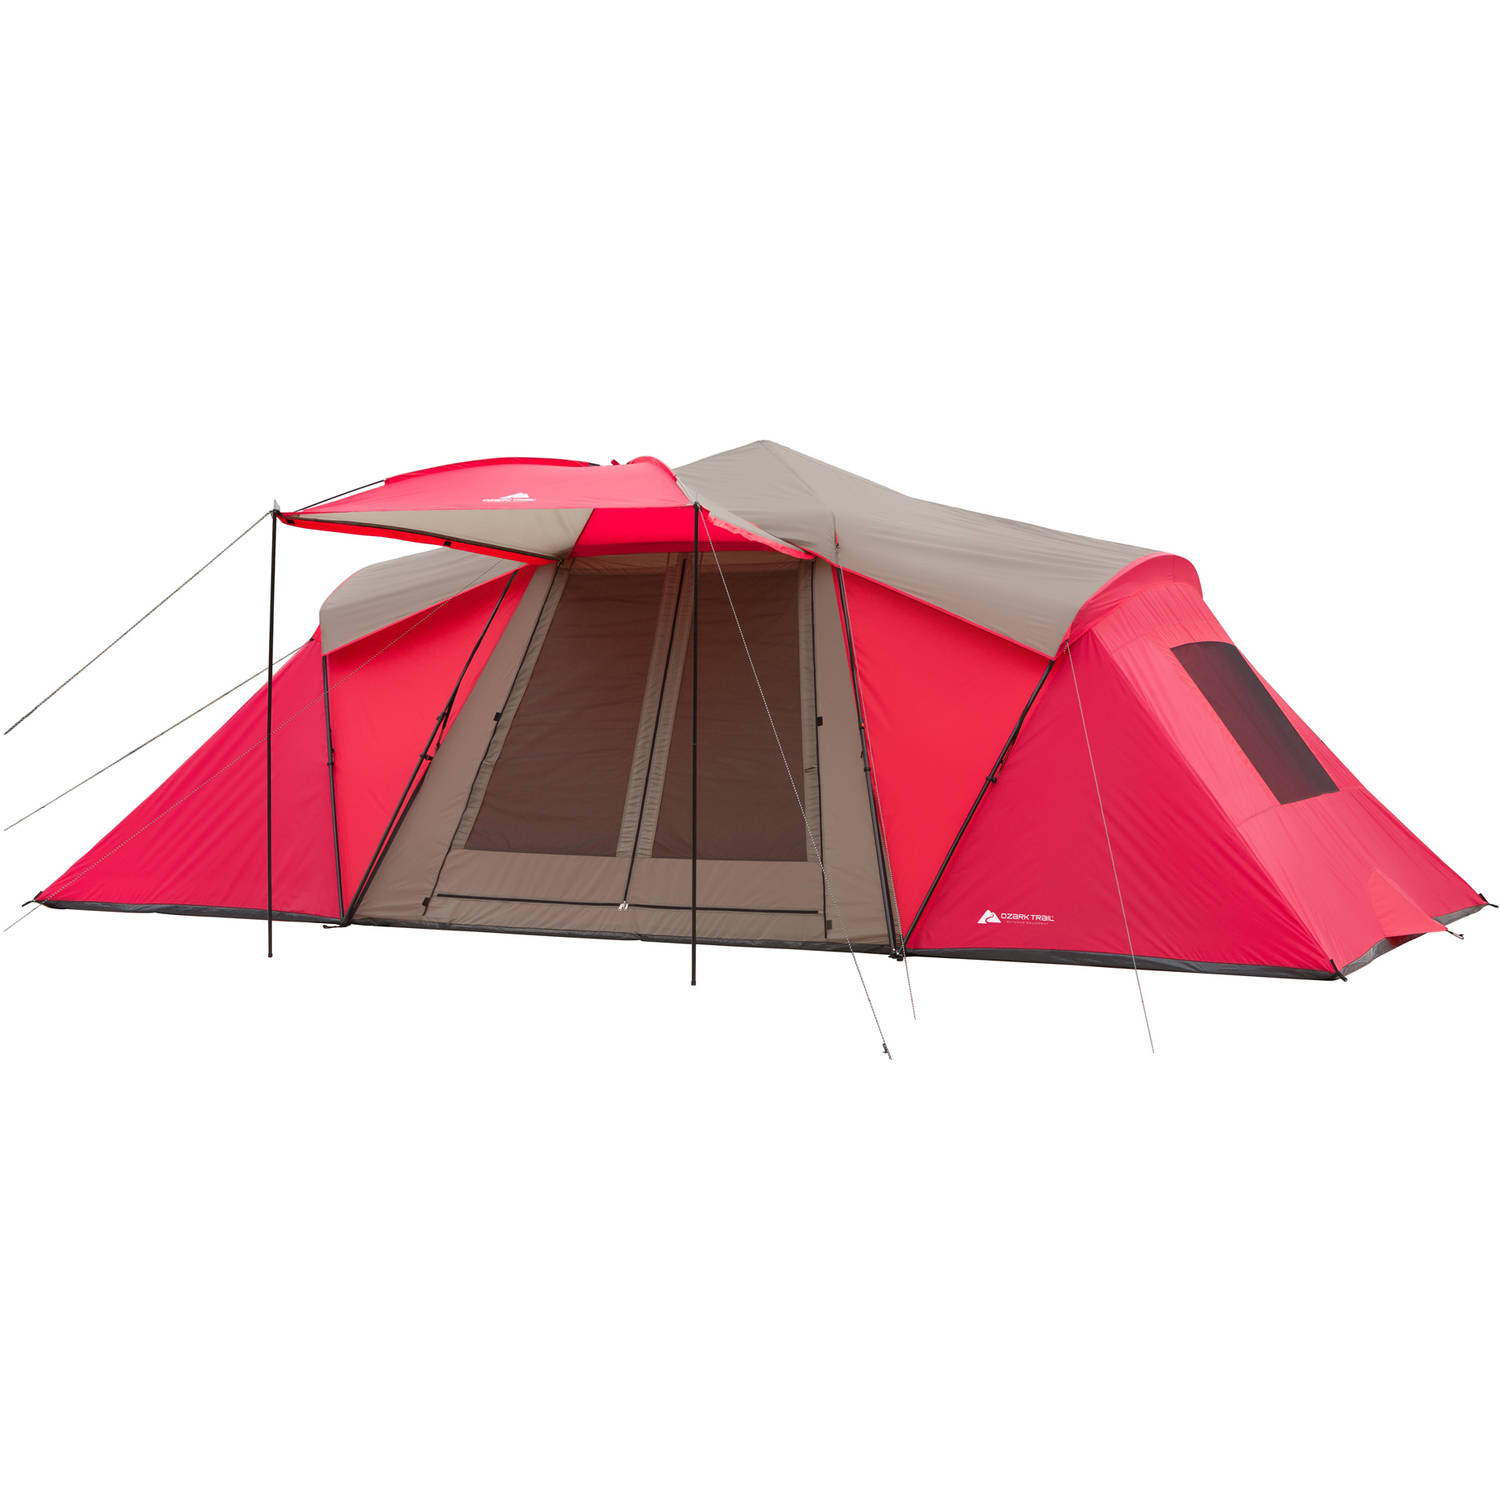 Ozark Trail 12-person 21′ x 10′ 3-room instant tent with awning for $100